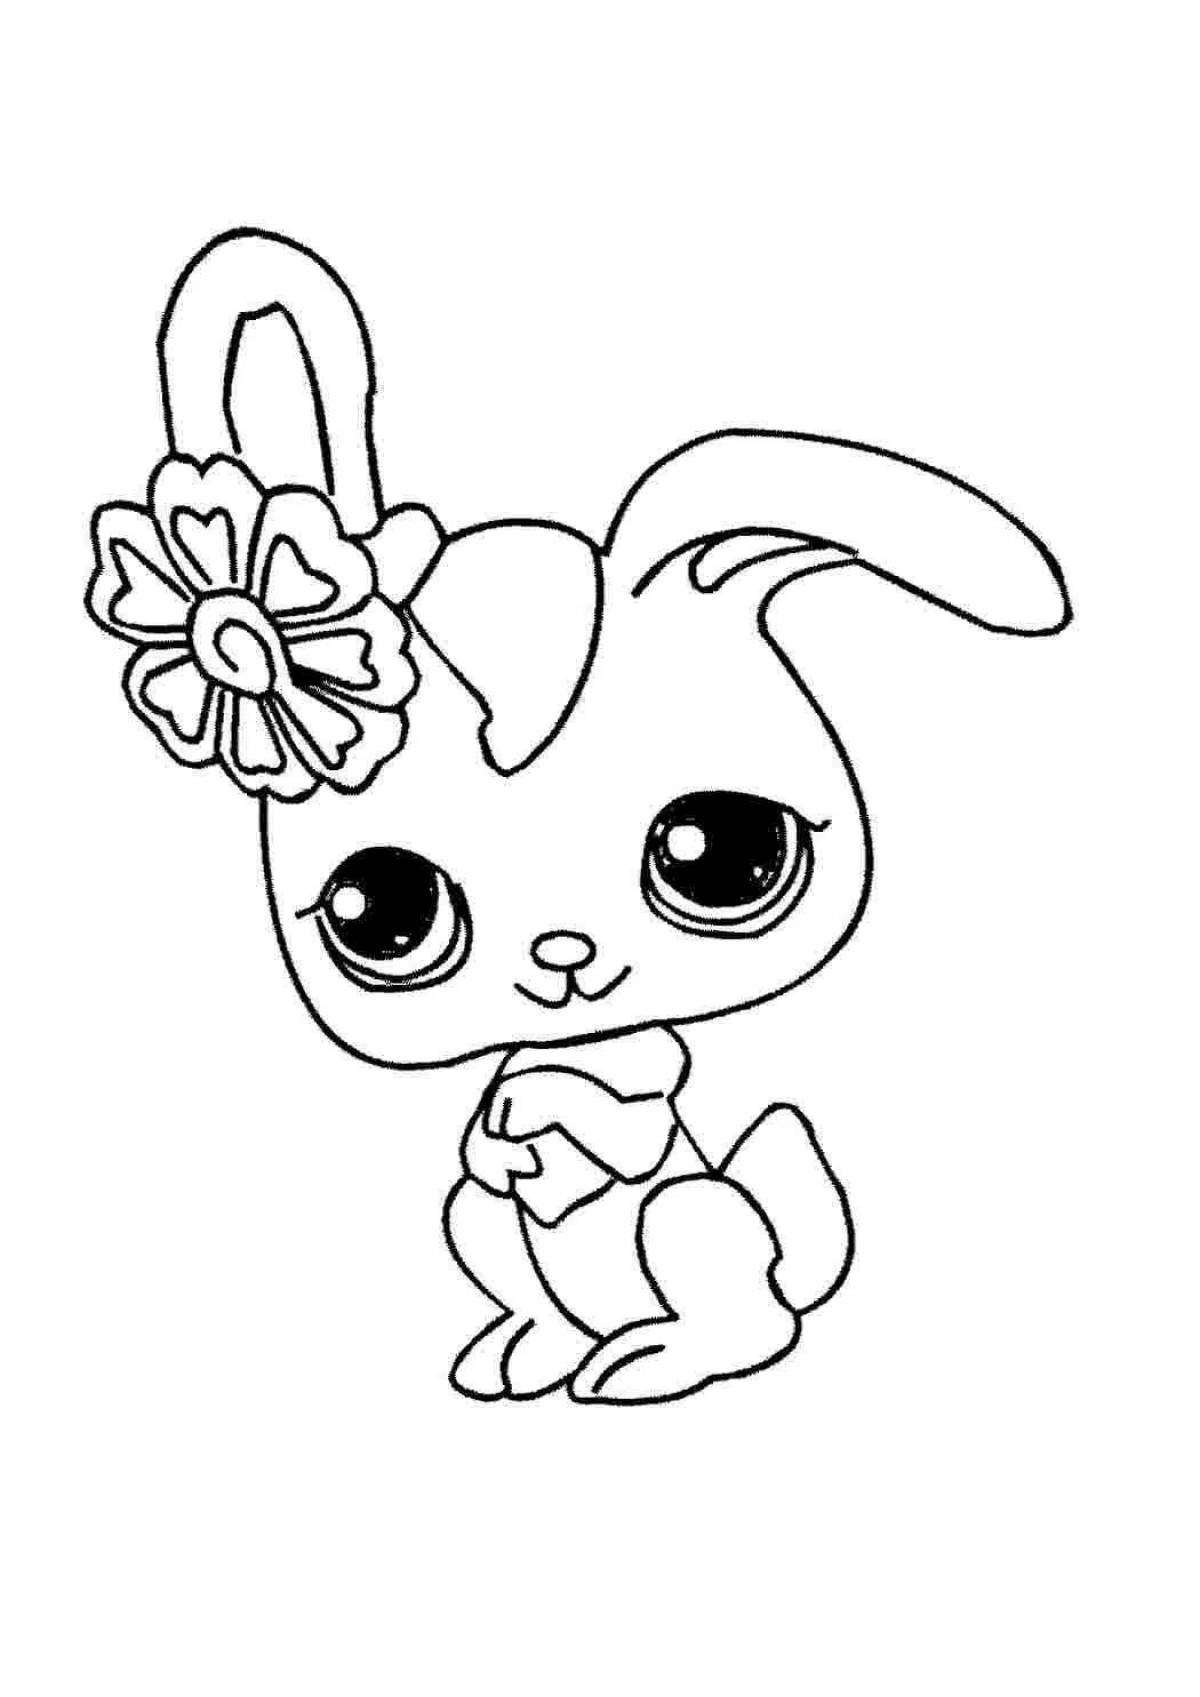 Soft coloring rabbit with a bow